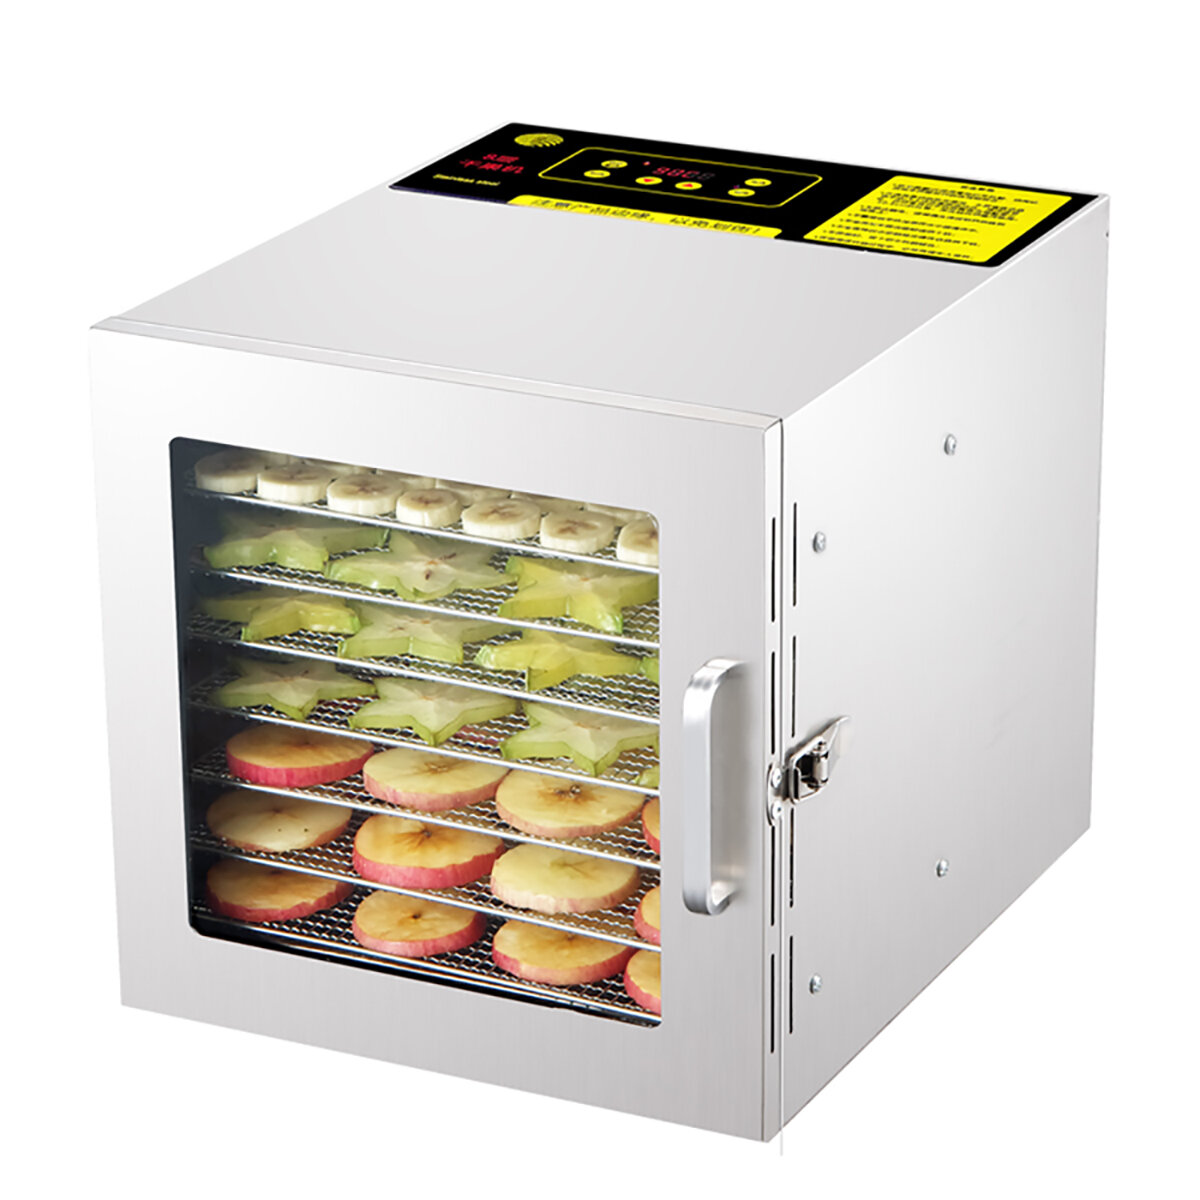 Image of 8 Layers Stainless Steel Fruit & Food Dehydrator Vegetable Meat Hot Air Dryer For Household/Commercial/DIY Food 600W 220